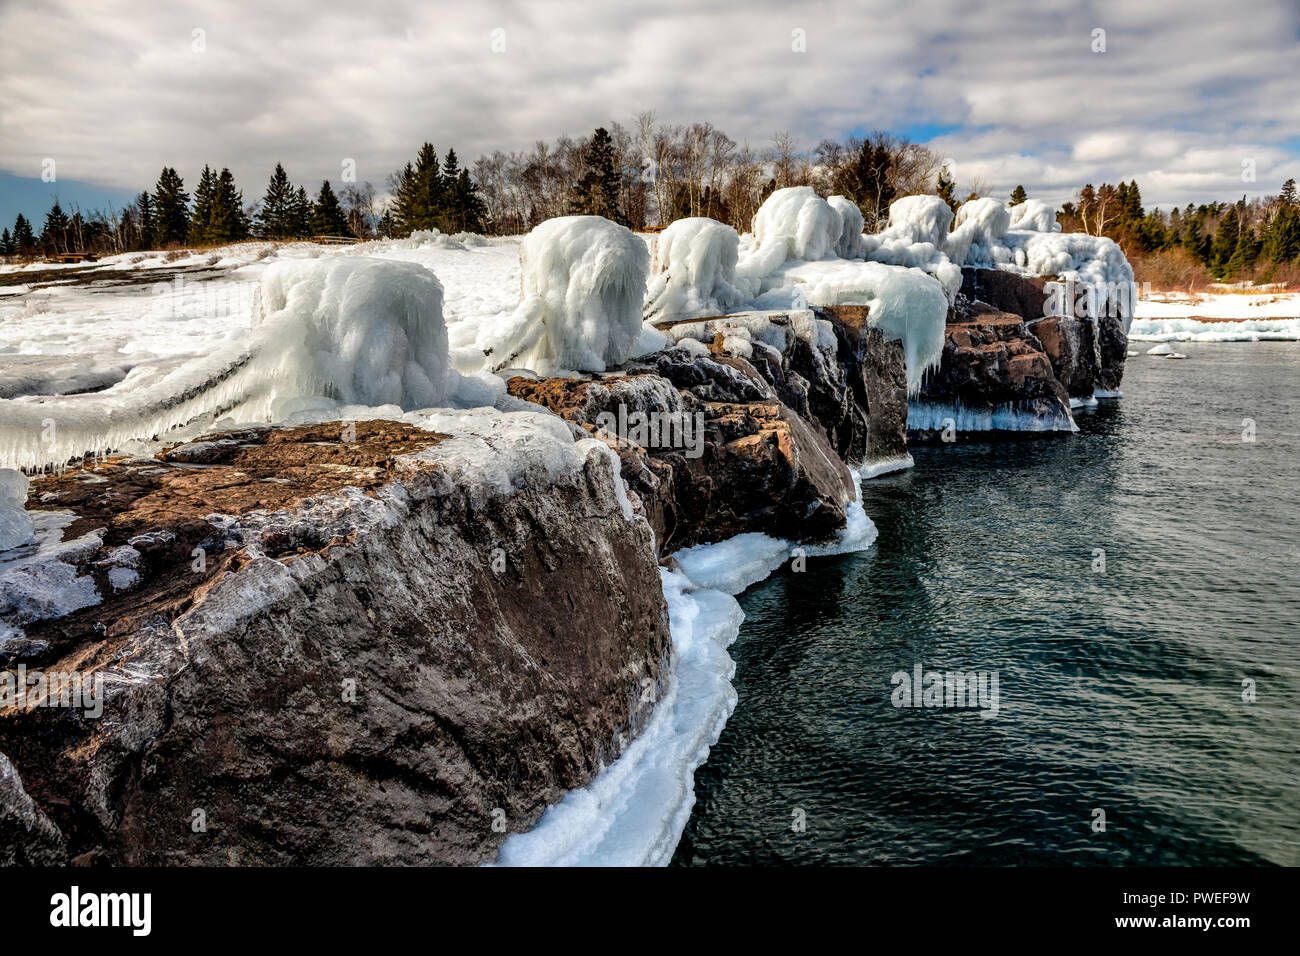 Waves from an early spring storm coat the shoreline of Gooseberry Falls State Park in a layer of ice. Stock Photo